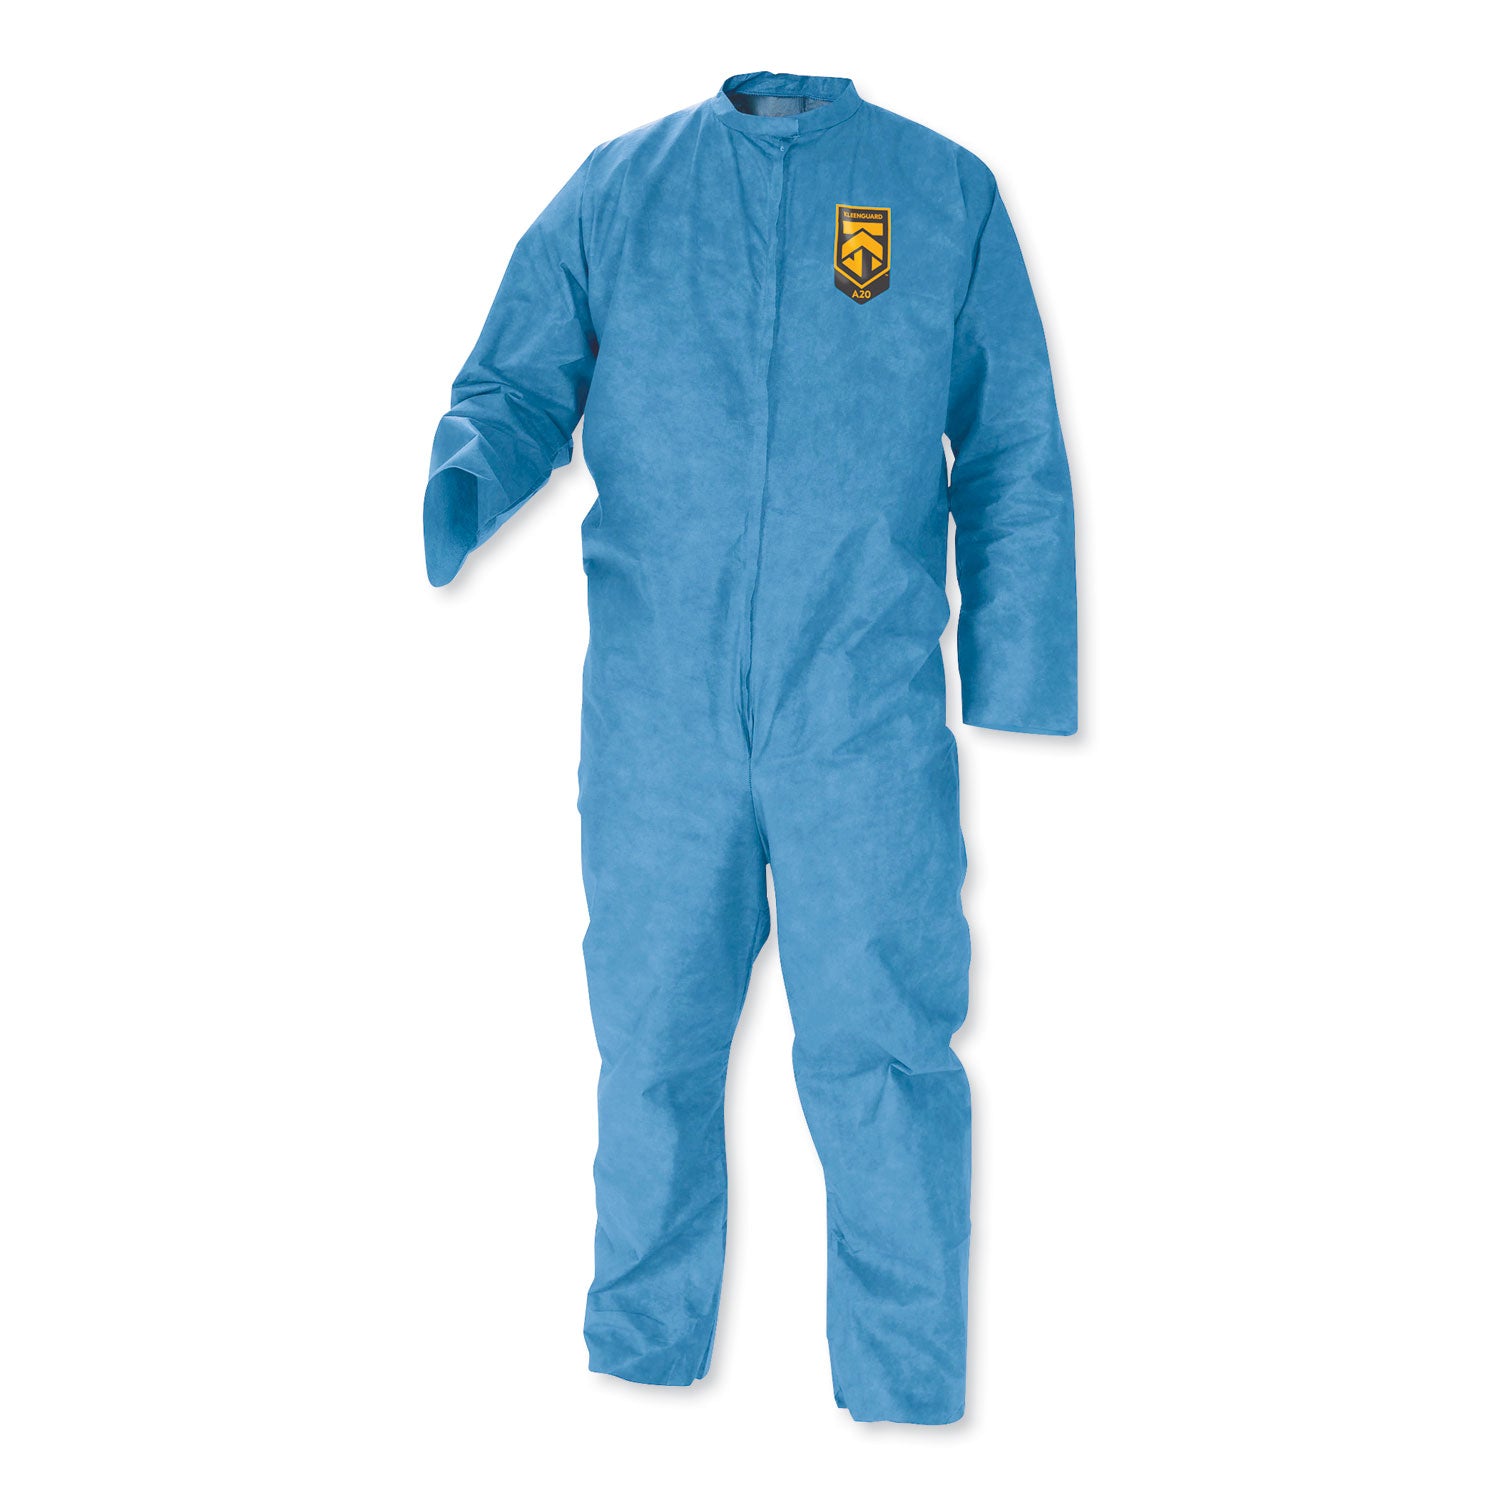 a20-breathable-particle-protection-coveralls-medium-blue-24-carton_kcc58532 - 1